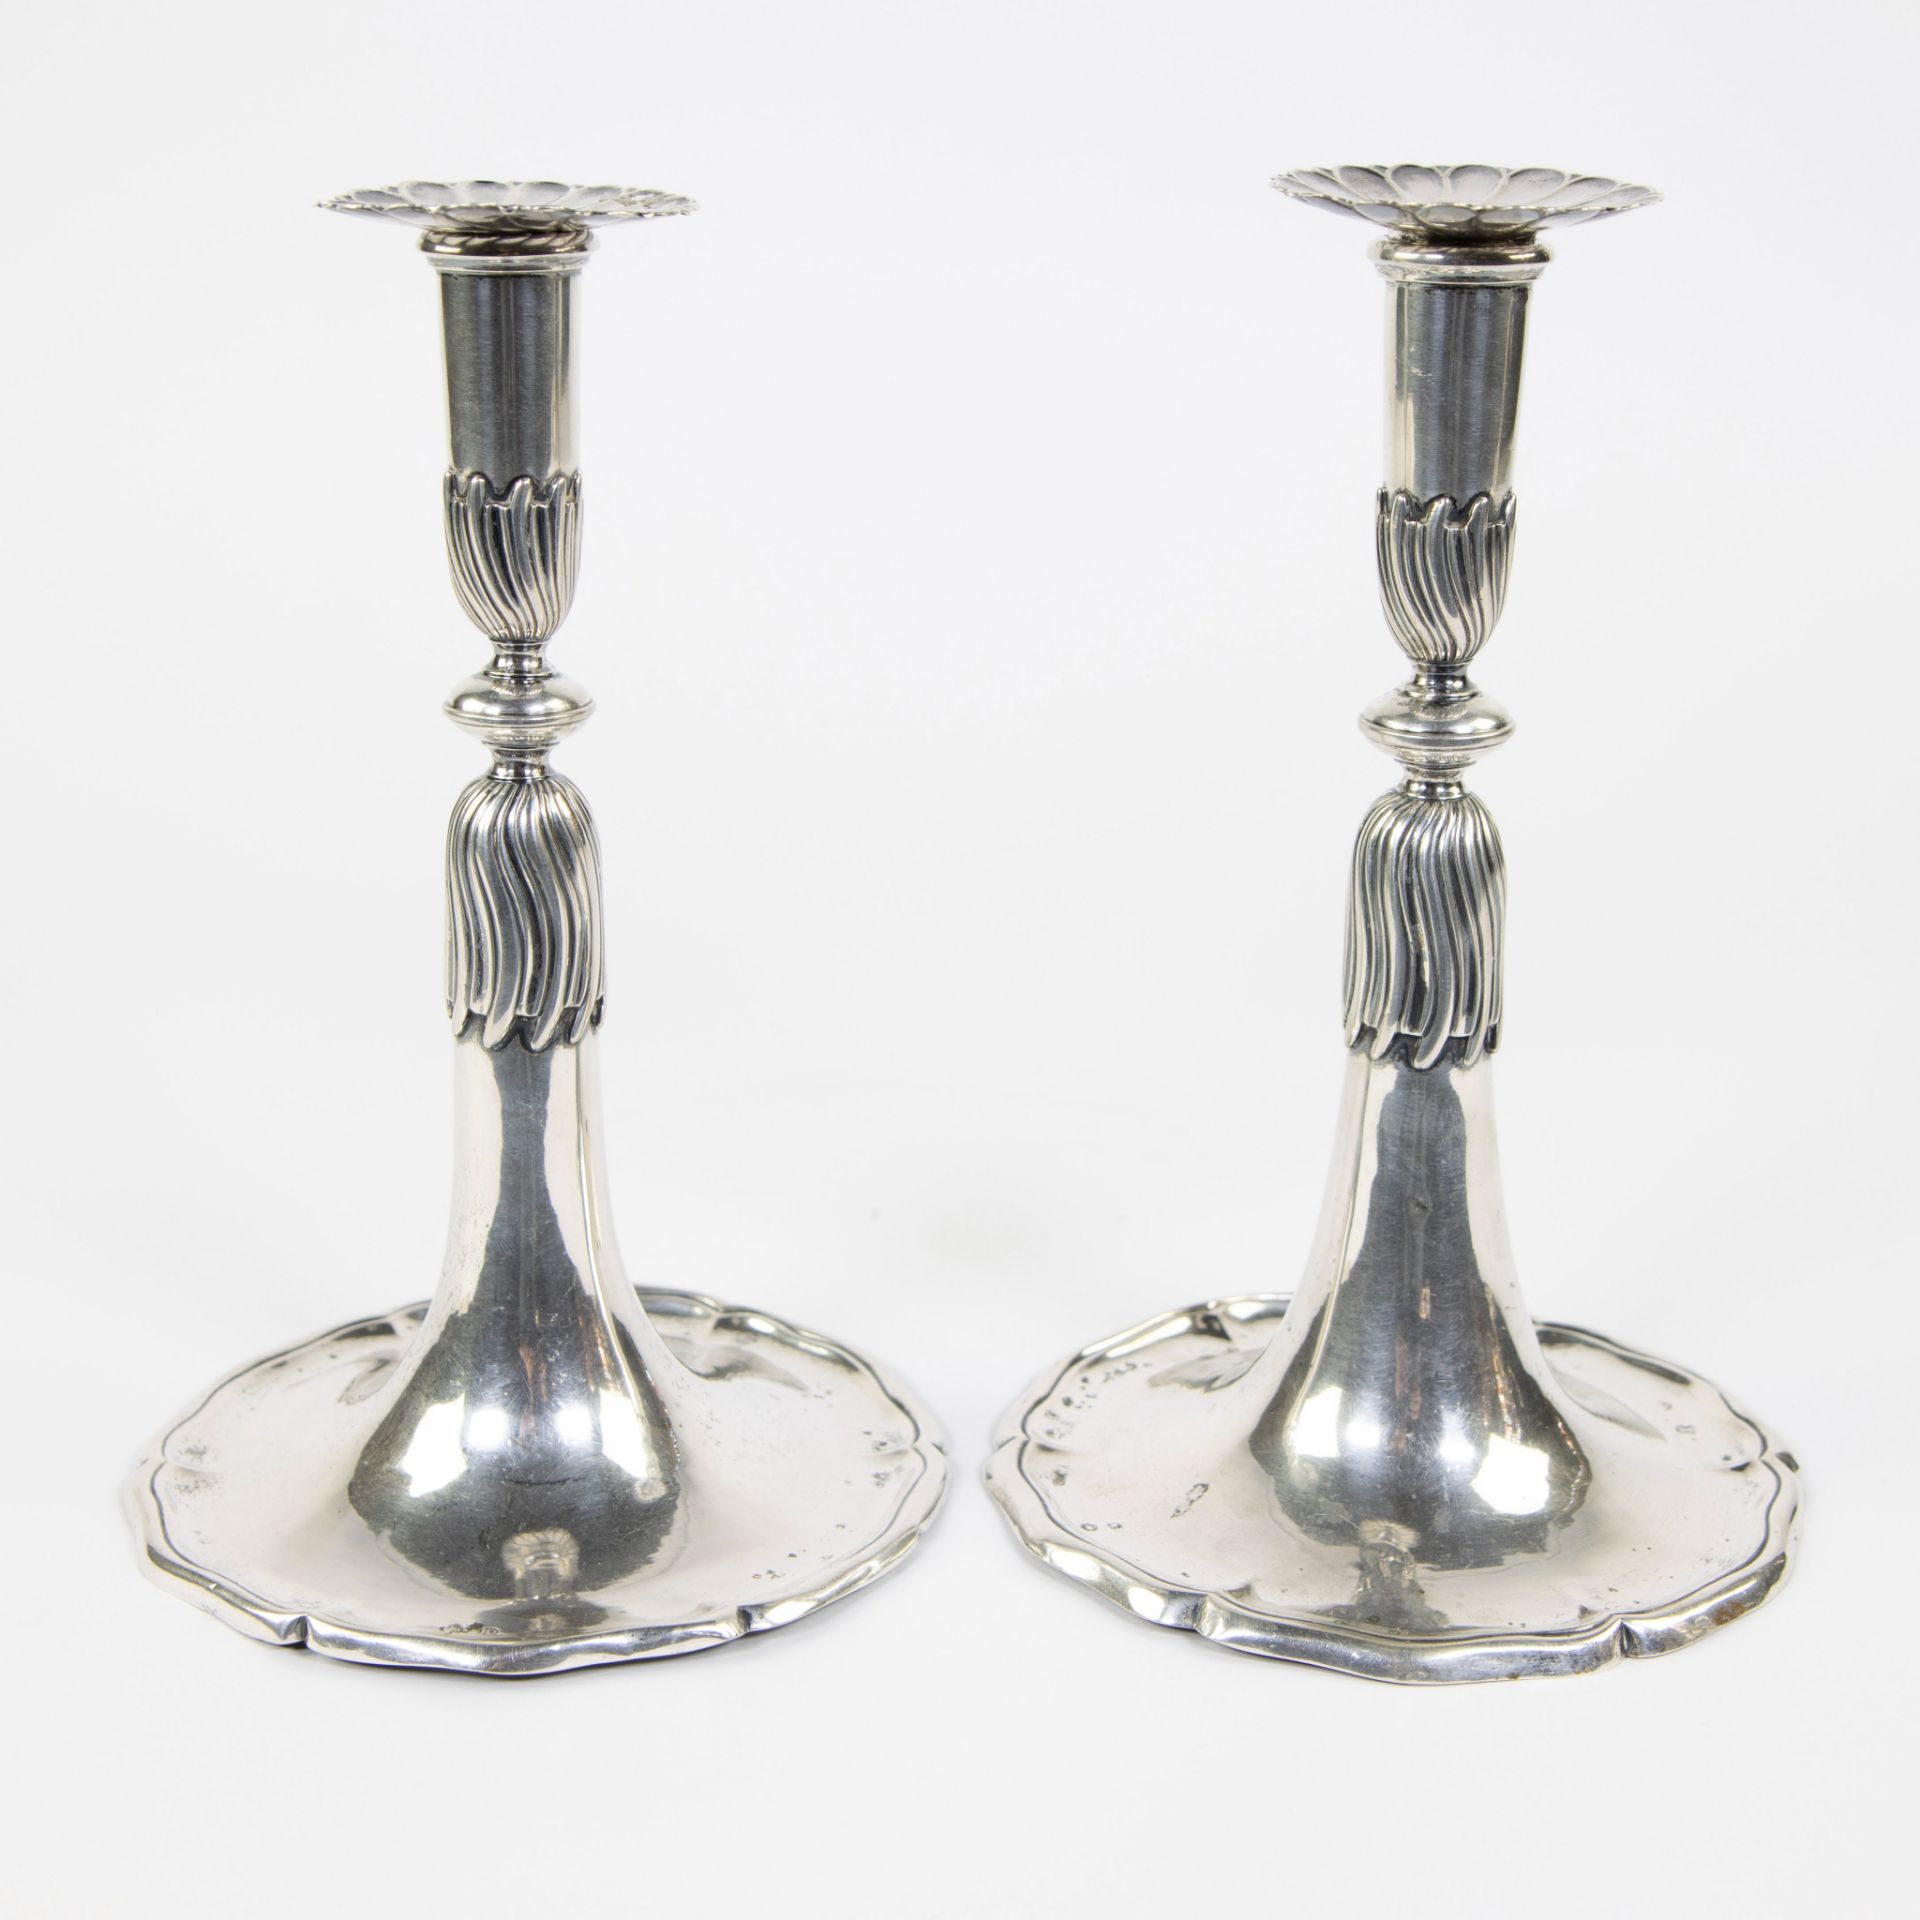 Pair of silver trumpet candlesticks, with hallmarks.